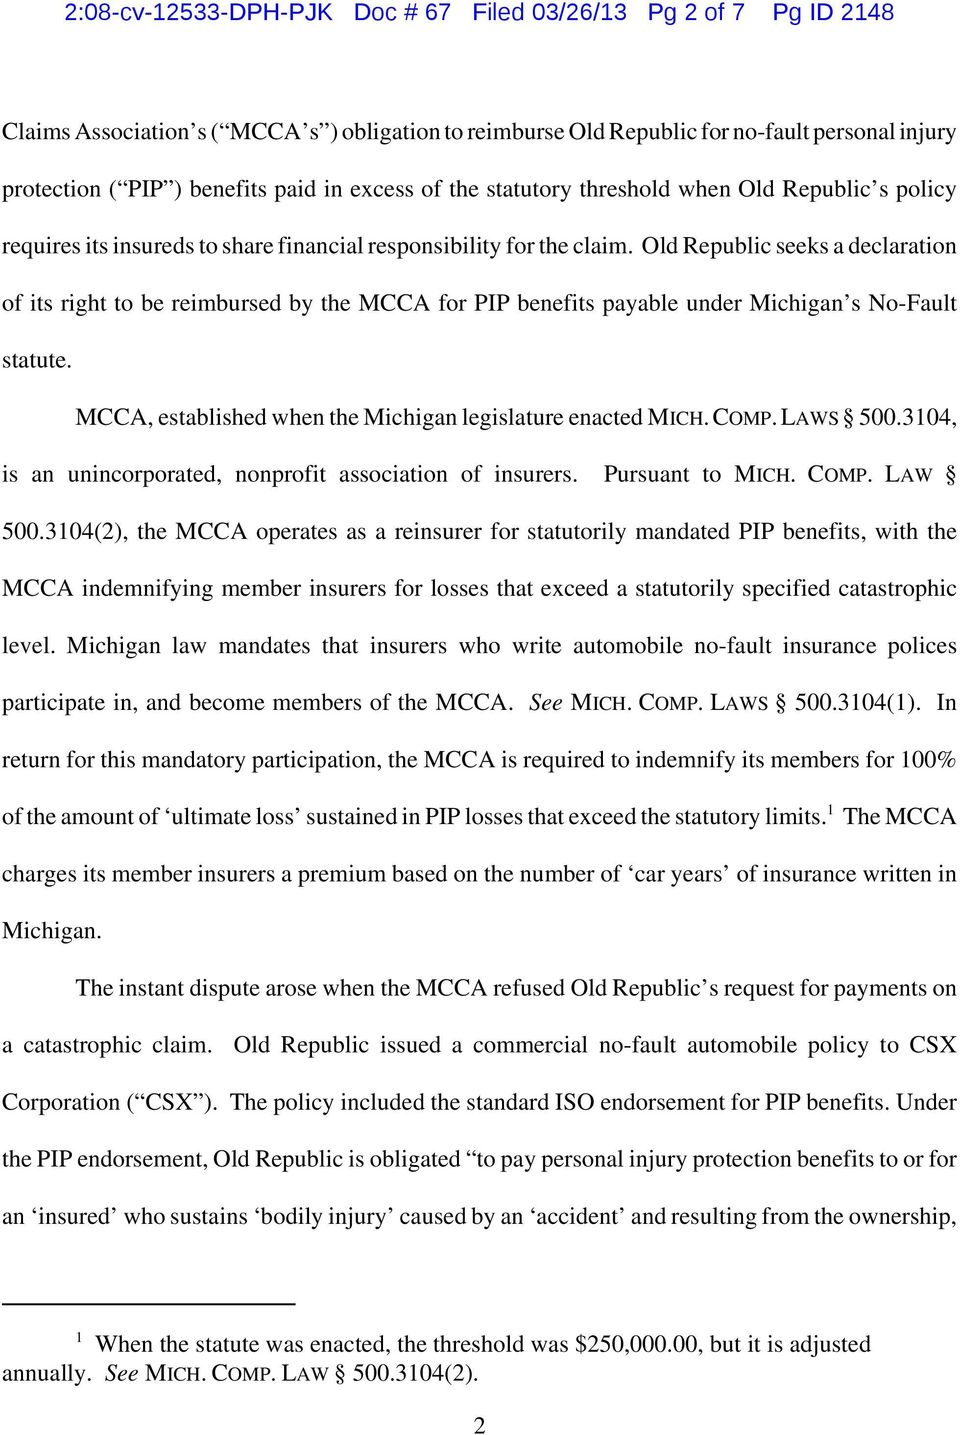 Old Republic seeks a declaration of its right to be reimbursed by the MCCA for PIP benefits payable under Michigan s No-Fault statute. MCCA, established when the Michigan legislature enacted MICH.